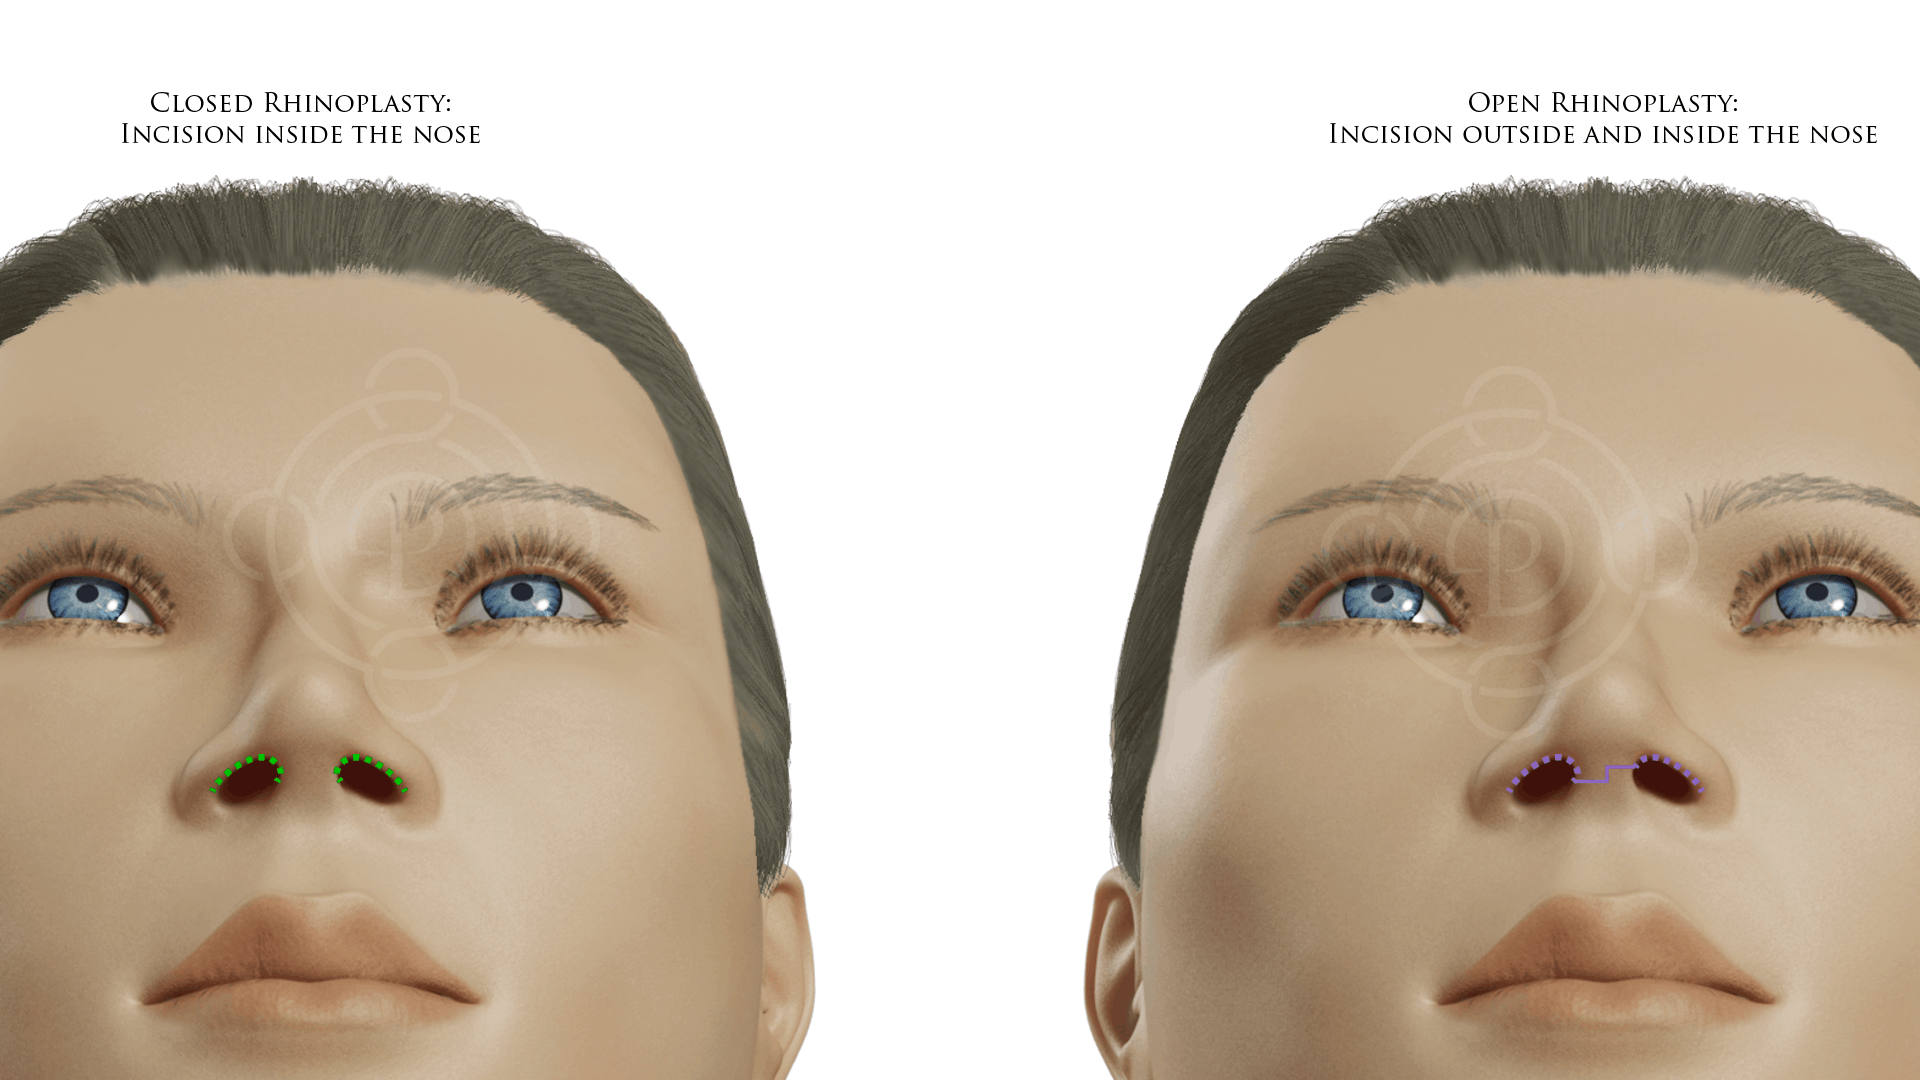 Closed Rhinoplasty: Incision Inside the Nose vs Open Rhinoplasty: Incision Outside and Inside the Nose